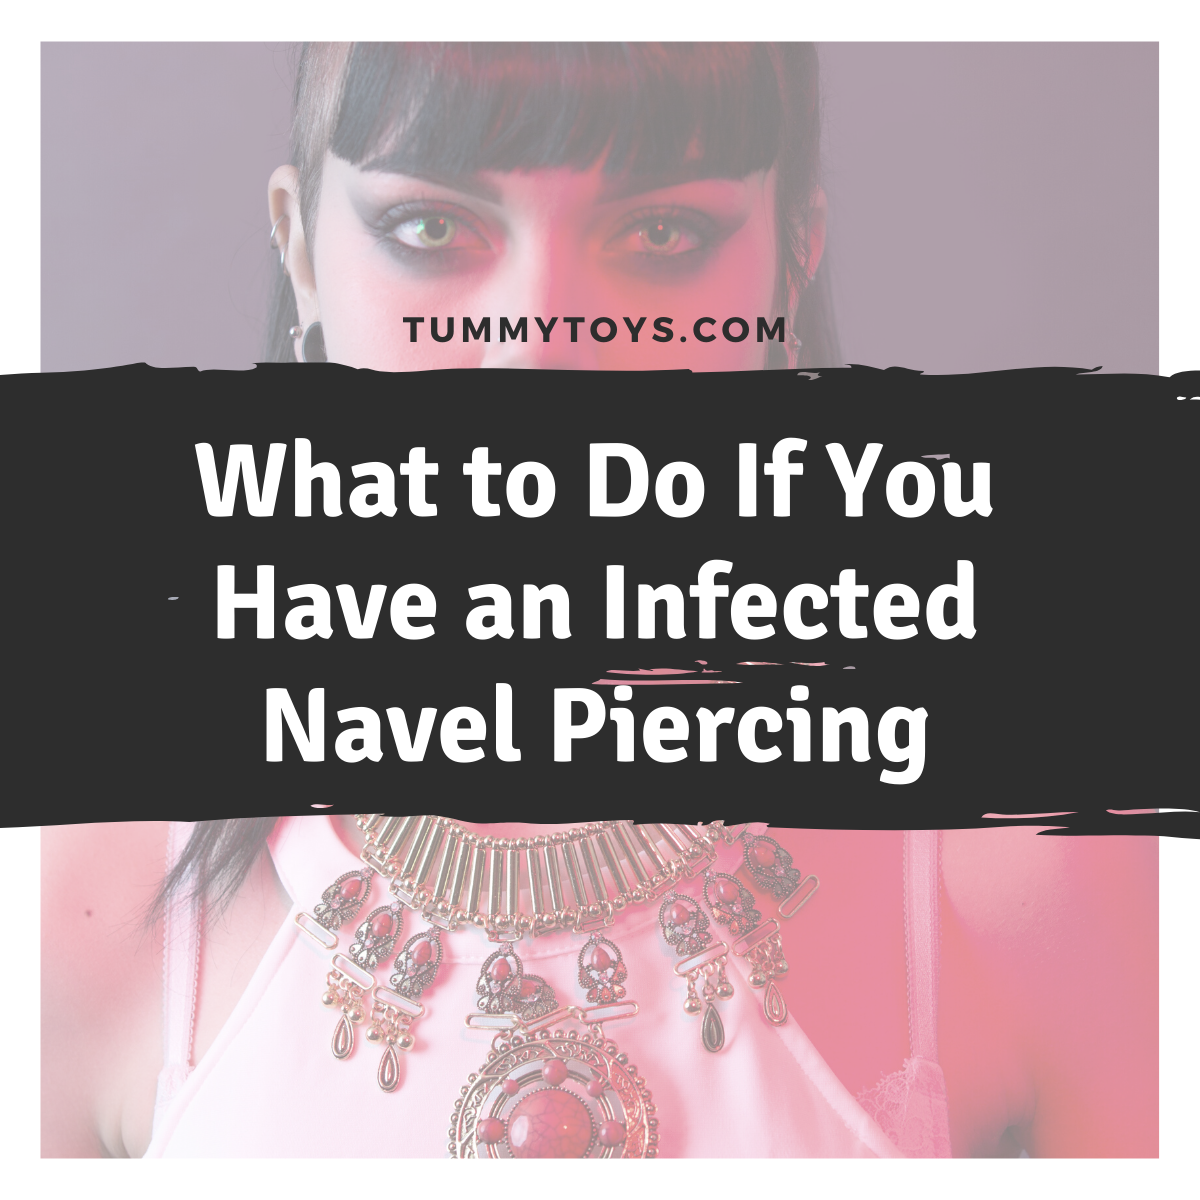 what to do if you have an infected navel piercing blog image